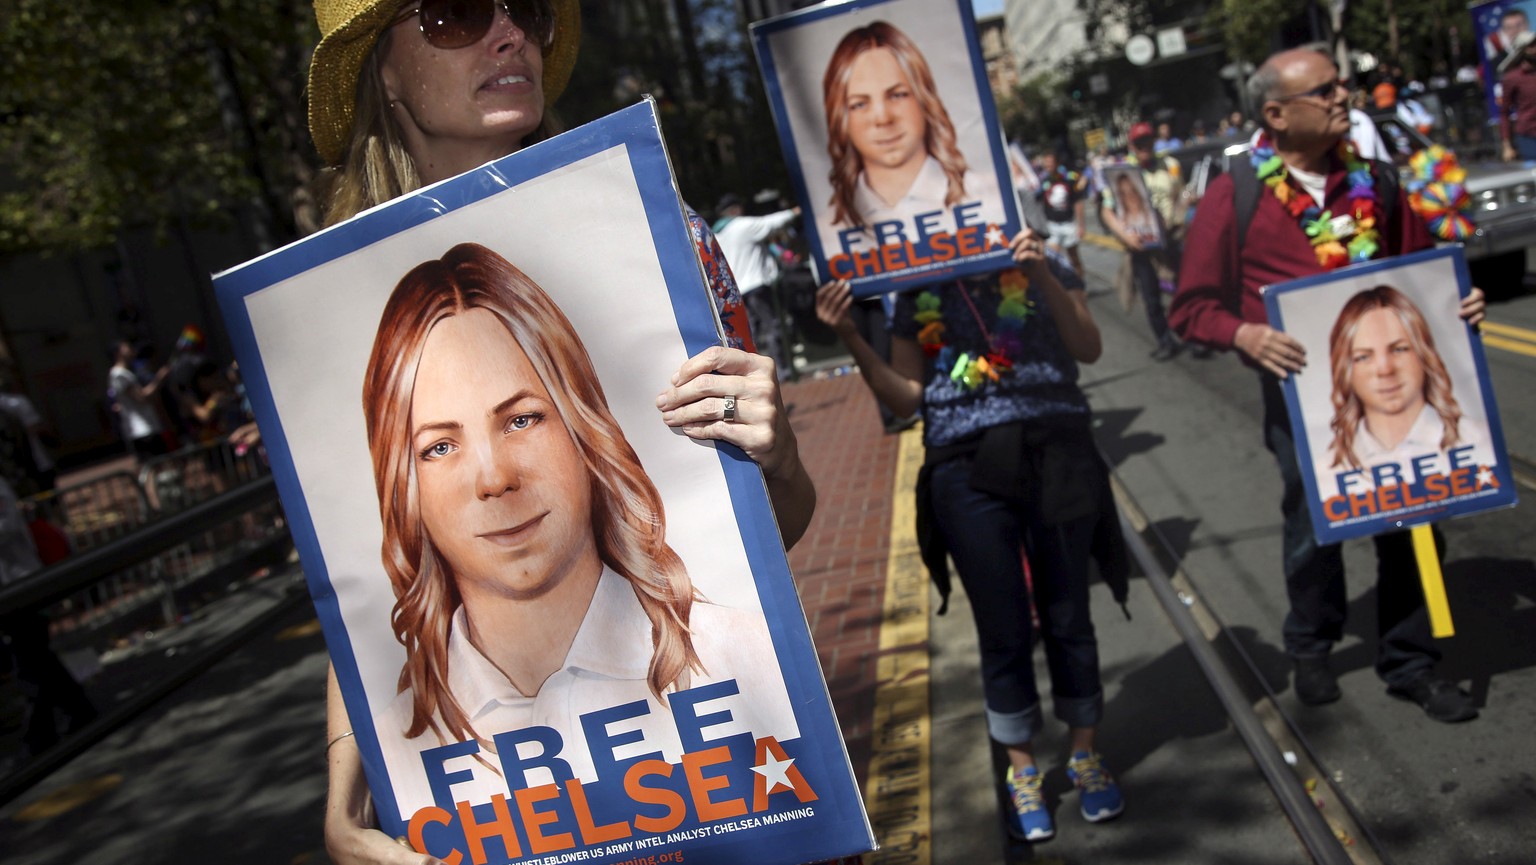 FILE PHOTO -- People hold signs calling for the release of imprisoned wikileaks whistleblower Chelsea Manning while marching in a gay pride parade in San Francisco, California June 28, 2015. REUTERS/E ...